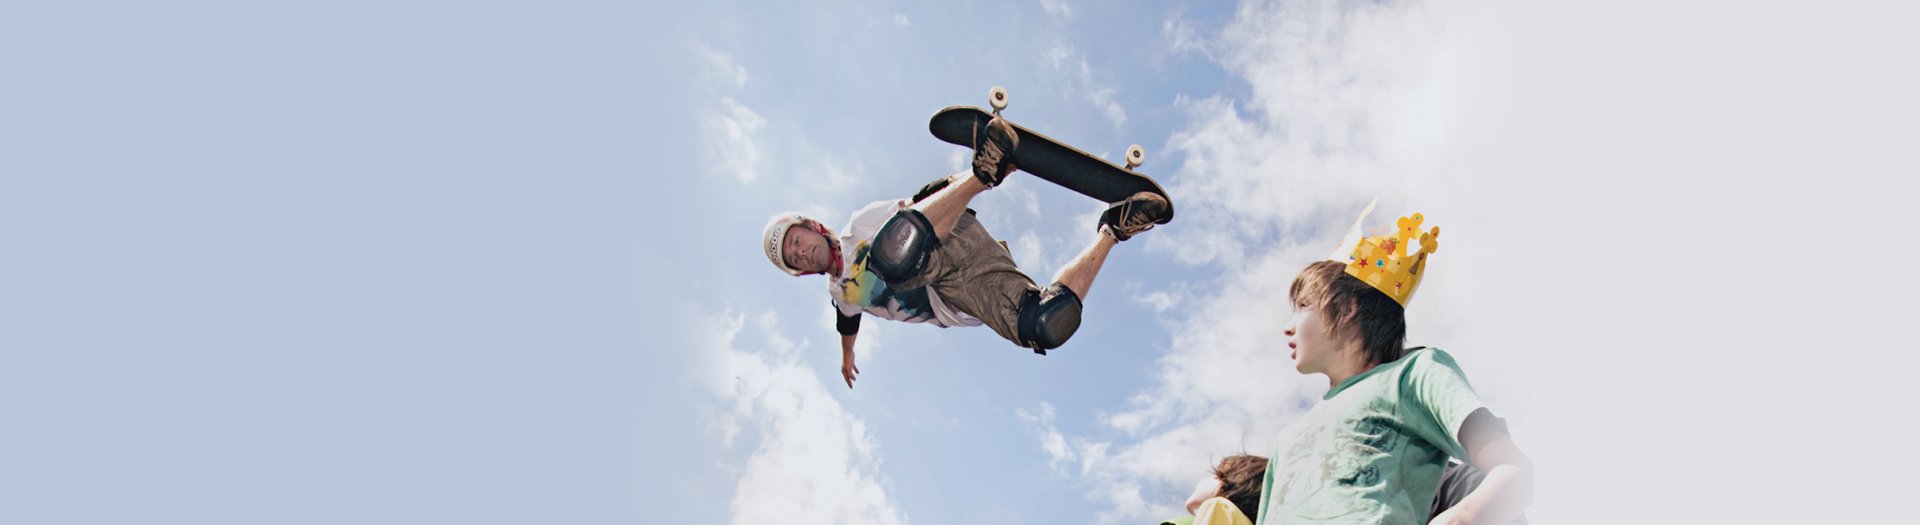 The background is a blue sky with white clouds. A skateboarder is up in the air on his board. There are two people in the bottom right of the frame looking up at him.